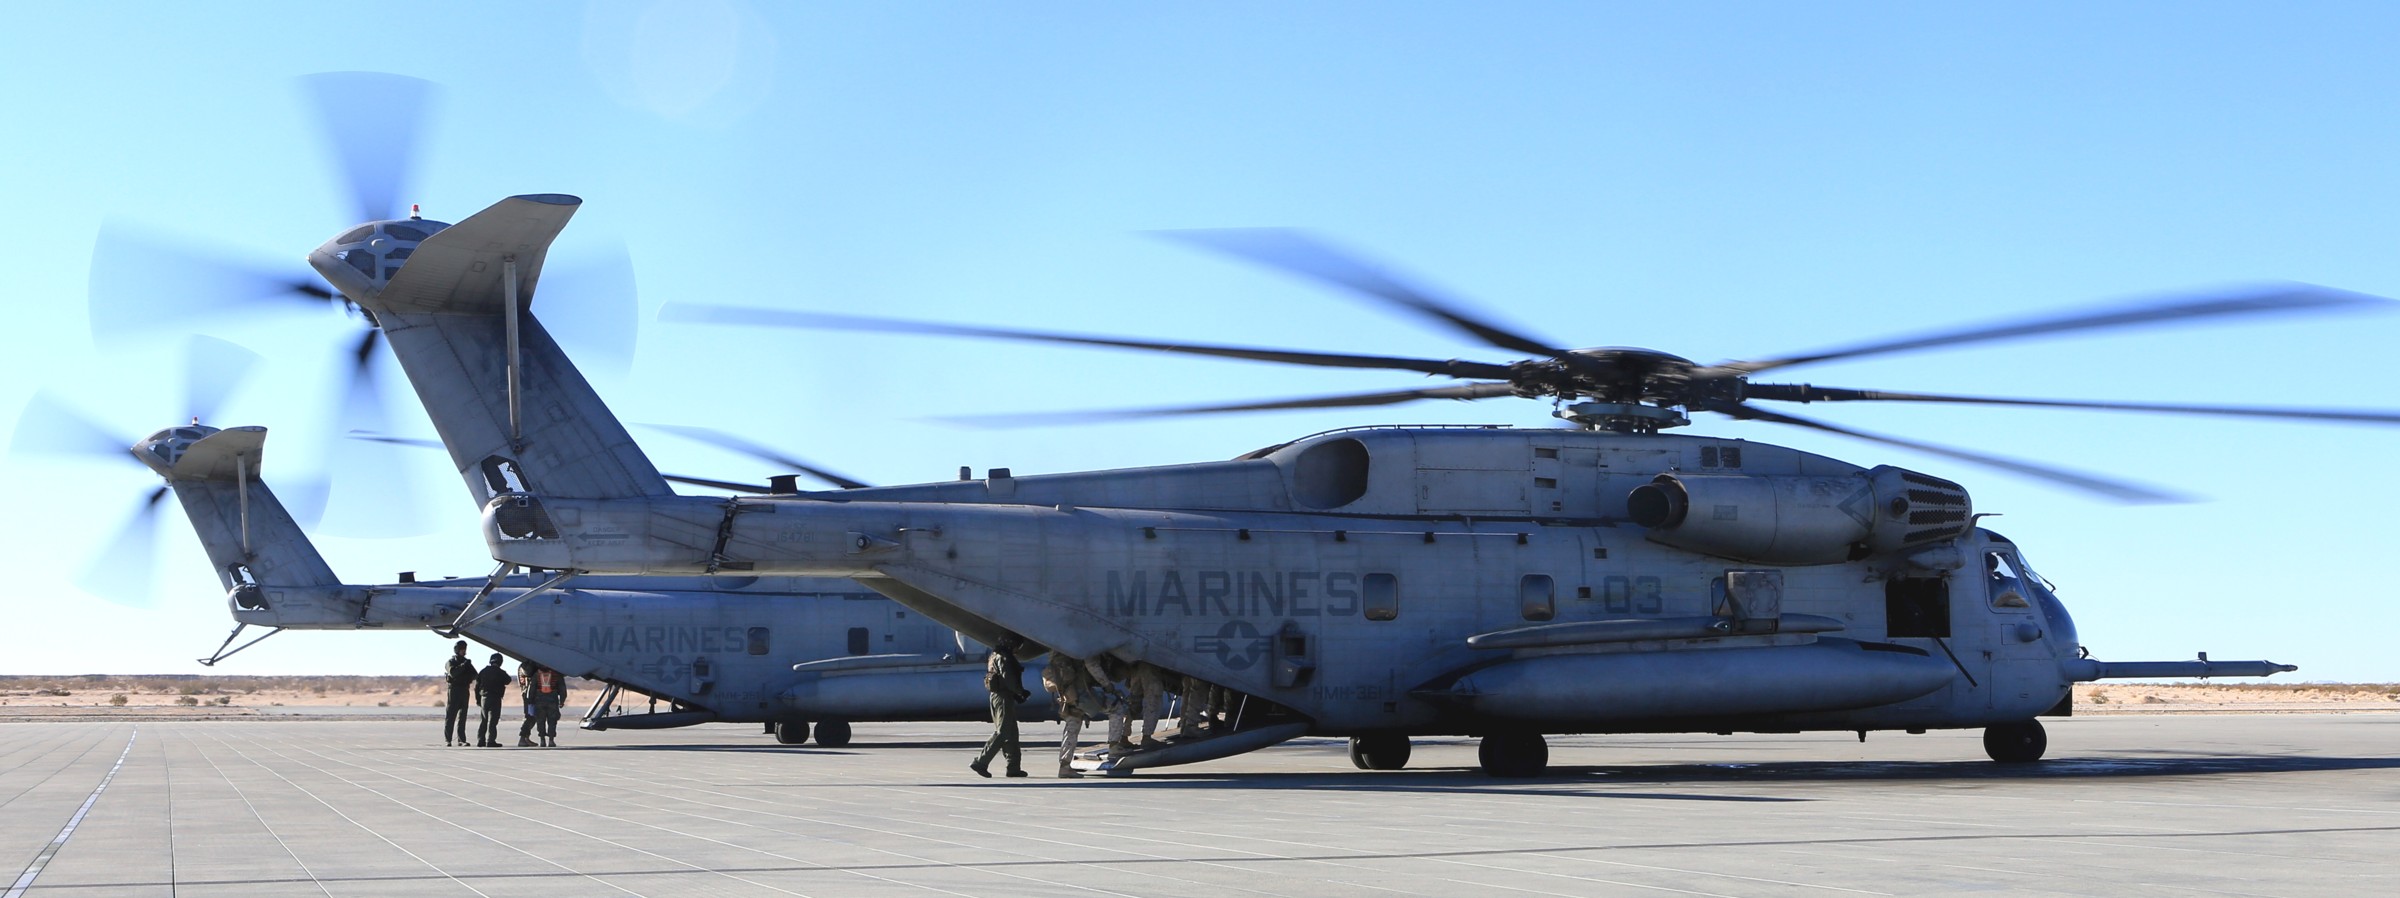 hmh-361 flying tigers marine heavy helicopter squadron usmc sikorsky ch-53e super stallion 10